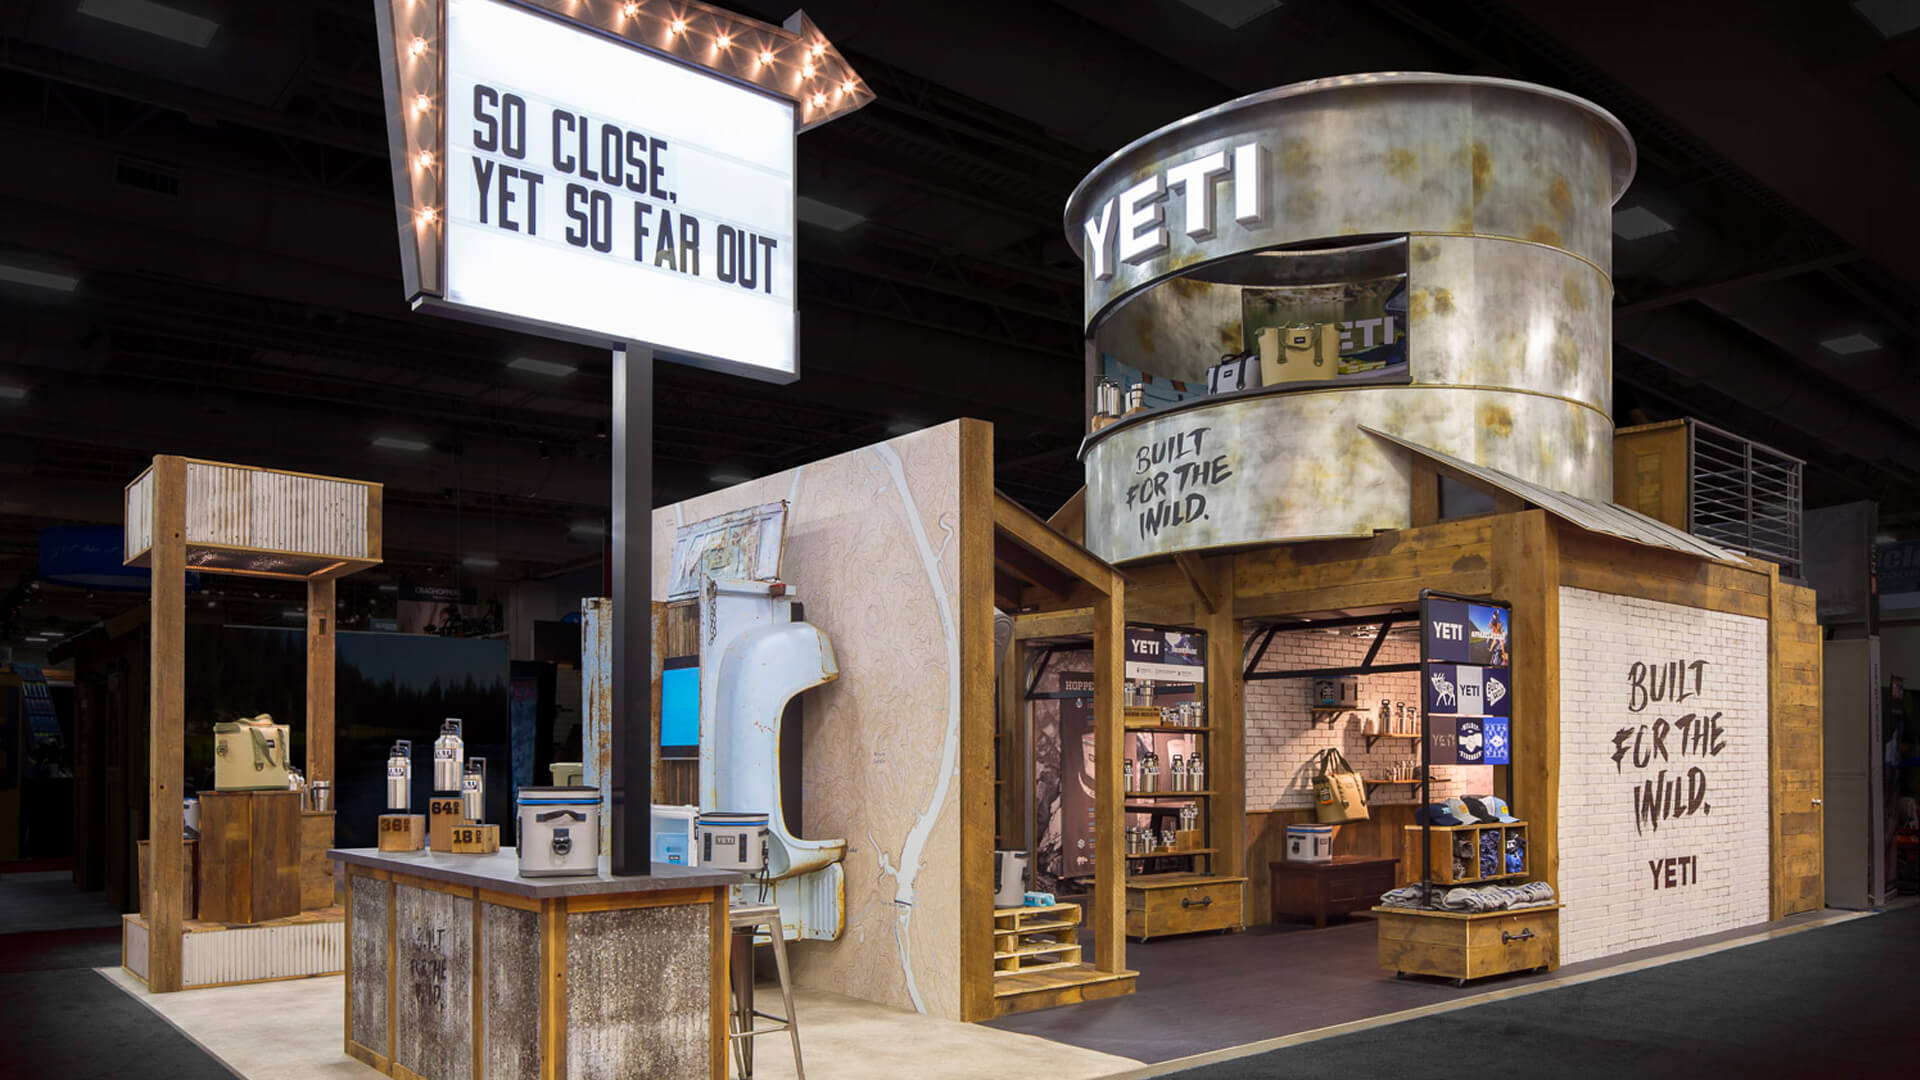 YETI Careers: Join the Team